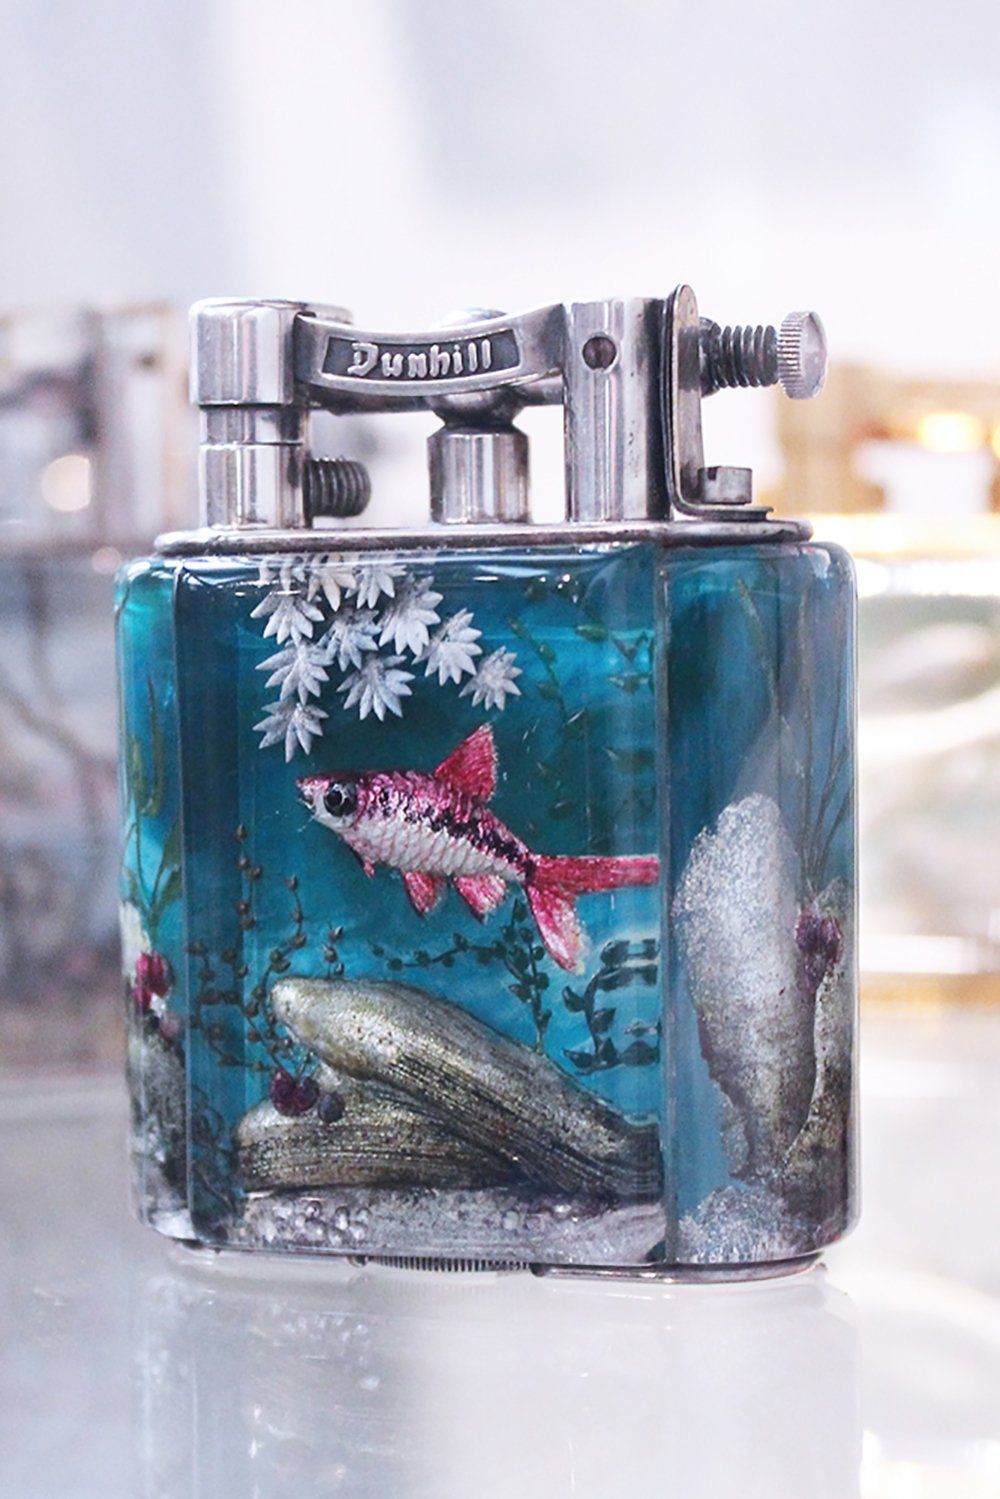 Dunhill Aquarium Table Lighters – the number 1 way to burn your money